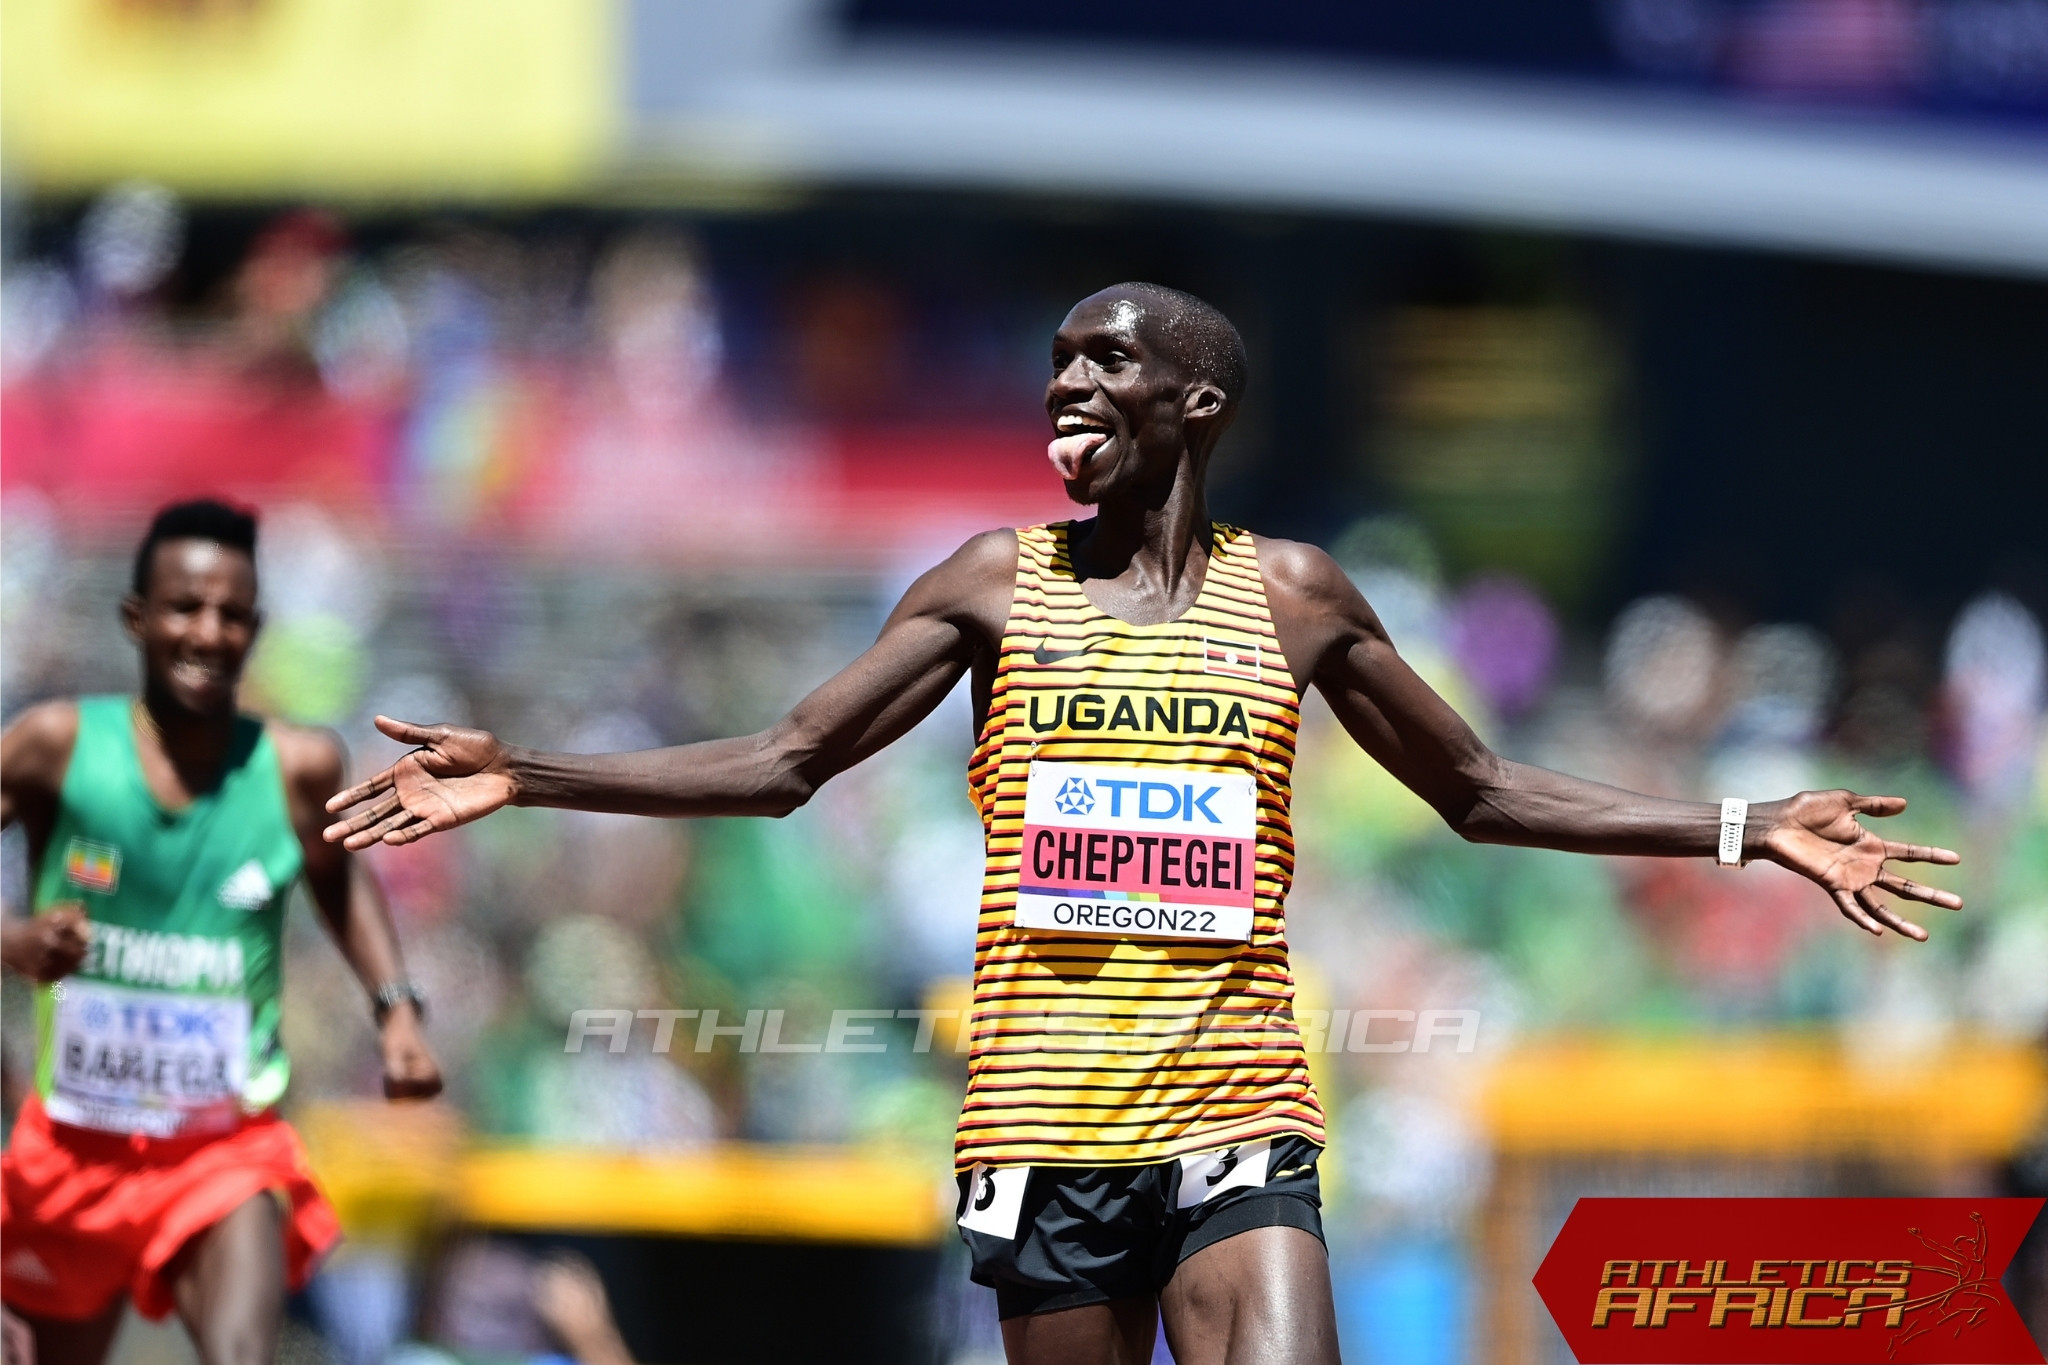 Ugandan Joshua Cheptegei wins gold in men's 10,000m at the World Athletics Championships in Oregon 22 / Photo credit: Getty Images for World Athletics